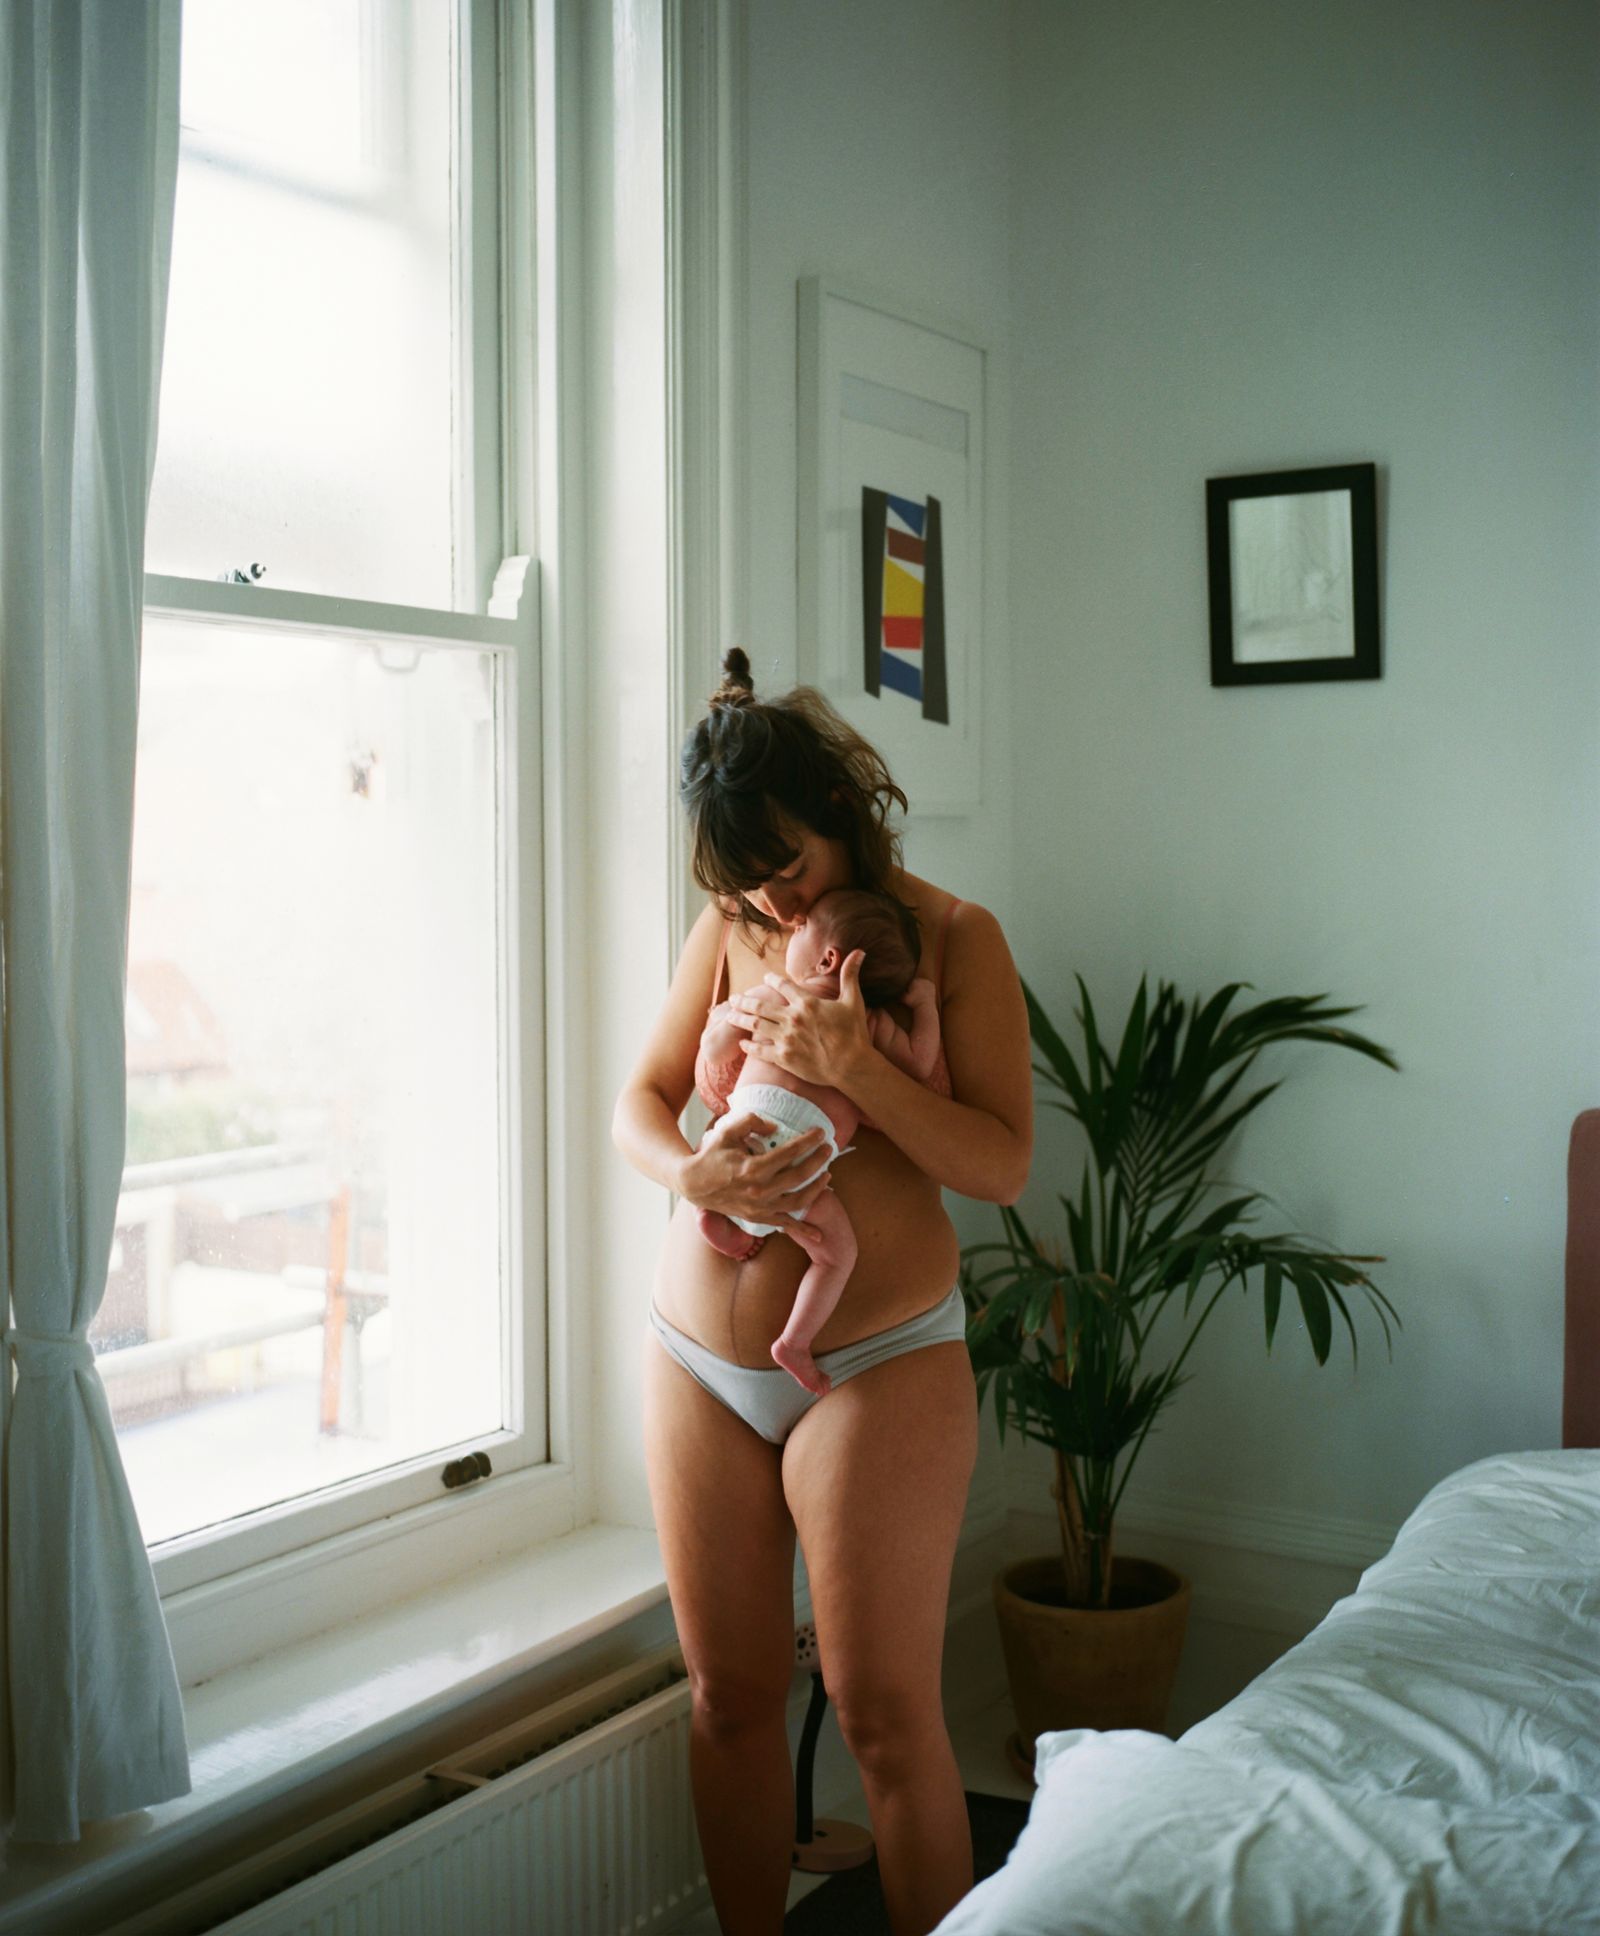 © Imogen Freeland - Image from the Birth of Mother photography project